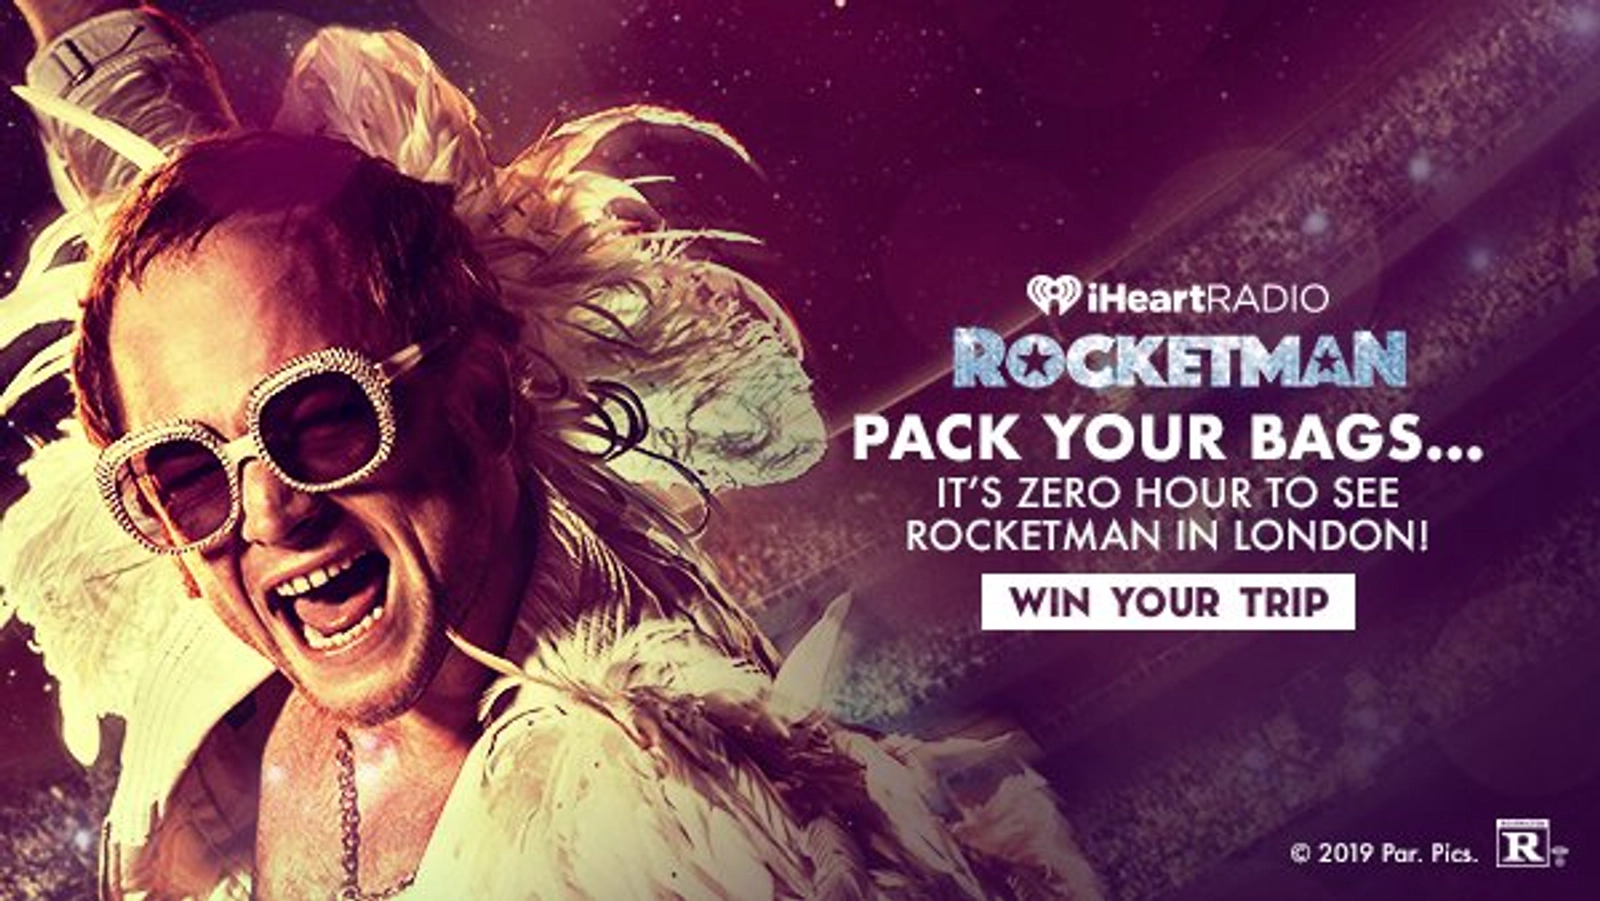  PACK YOUR BAGS… IT’S ZERO HOUR TO SEE ROCKETMAN IN LONDON!   - Thumbnail Image